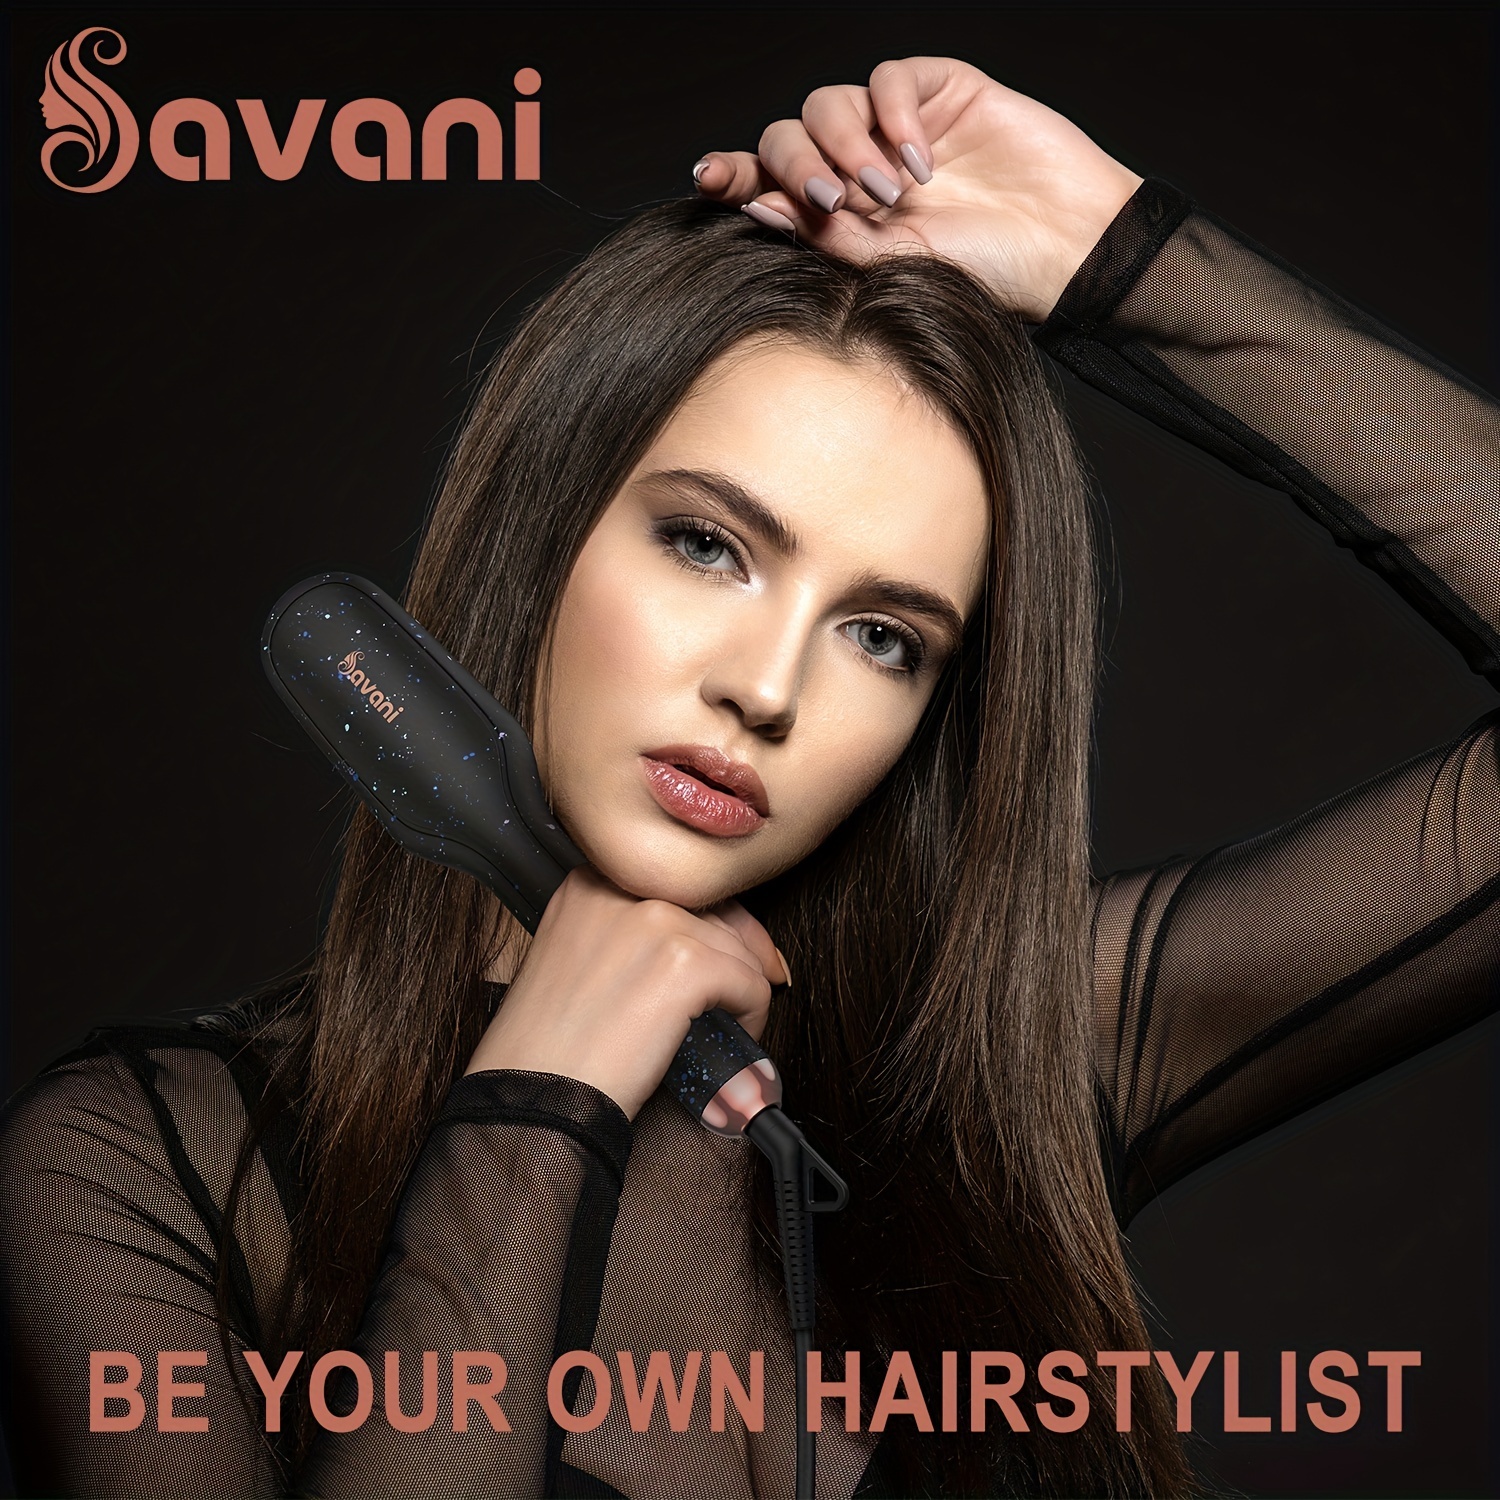 savani hair straightener brush fast heating ceramic negative ion hair straightening comb electric hot hair brush curly thick hair styling tool auto off anti scald multiple temp settings details 7